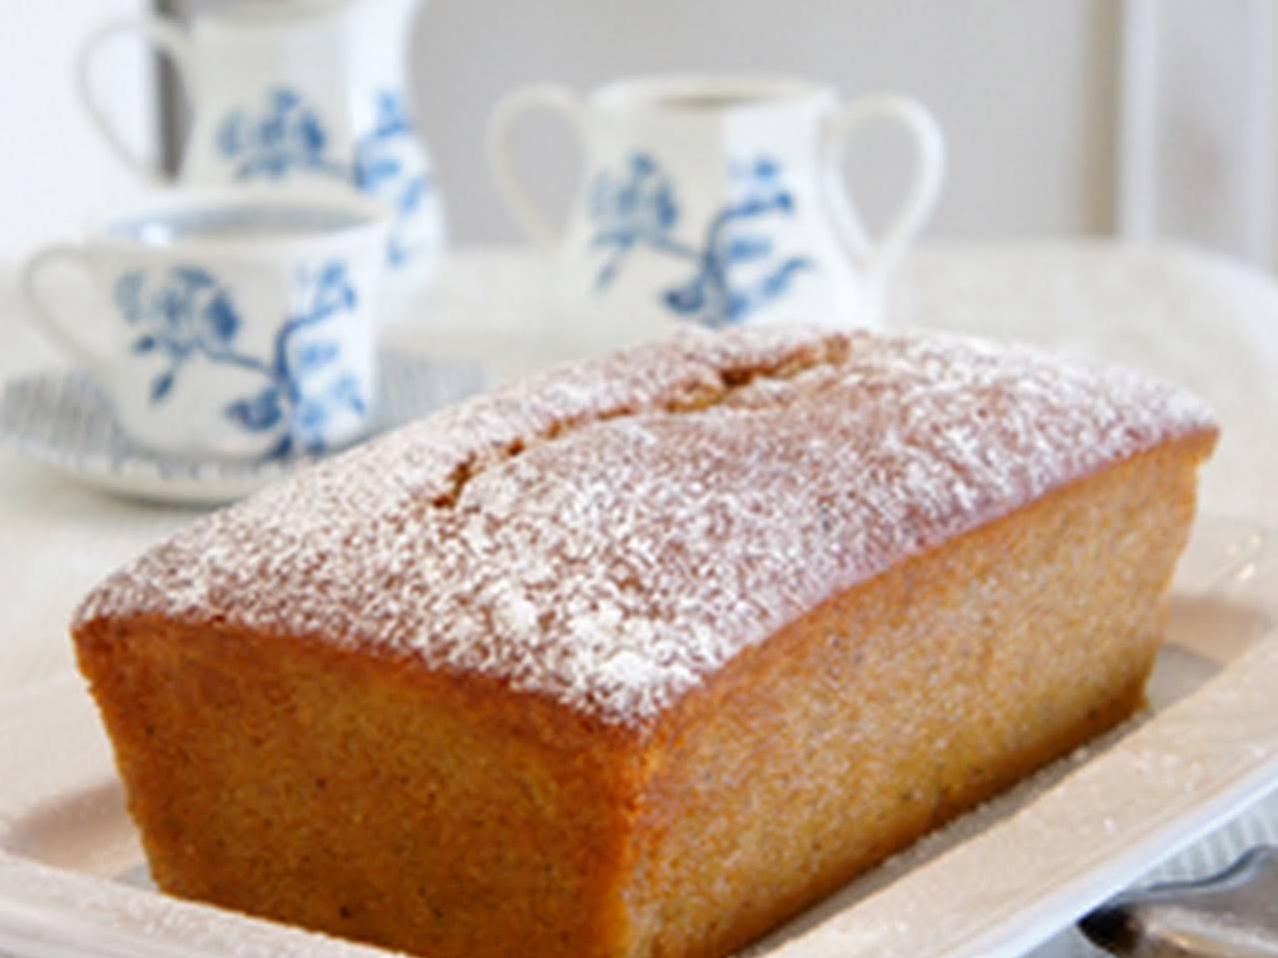  Freshly baked pound cake is always a crowd-pleaser.